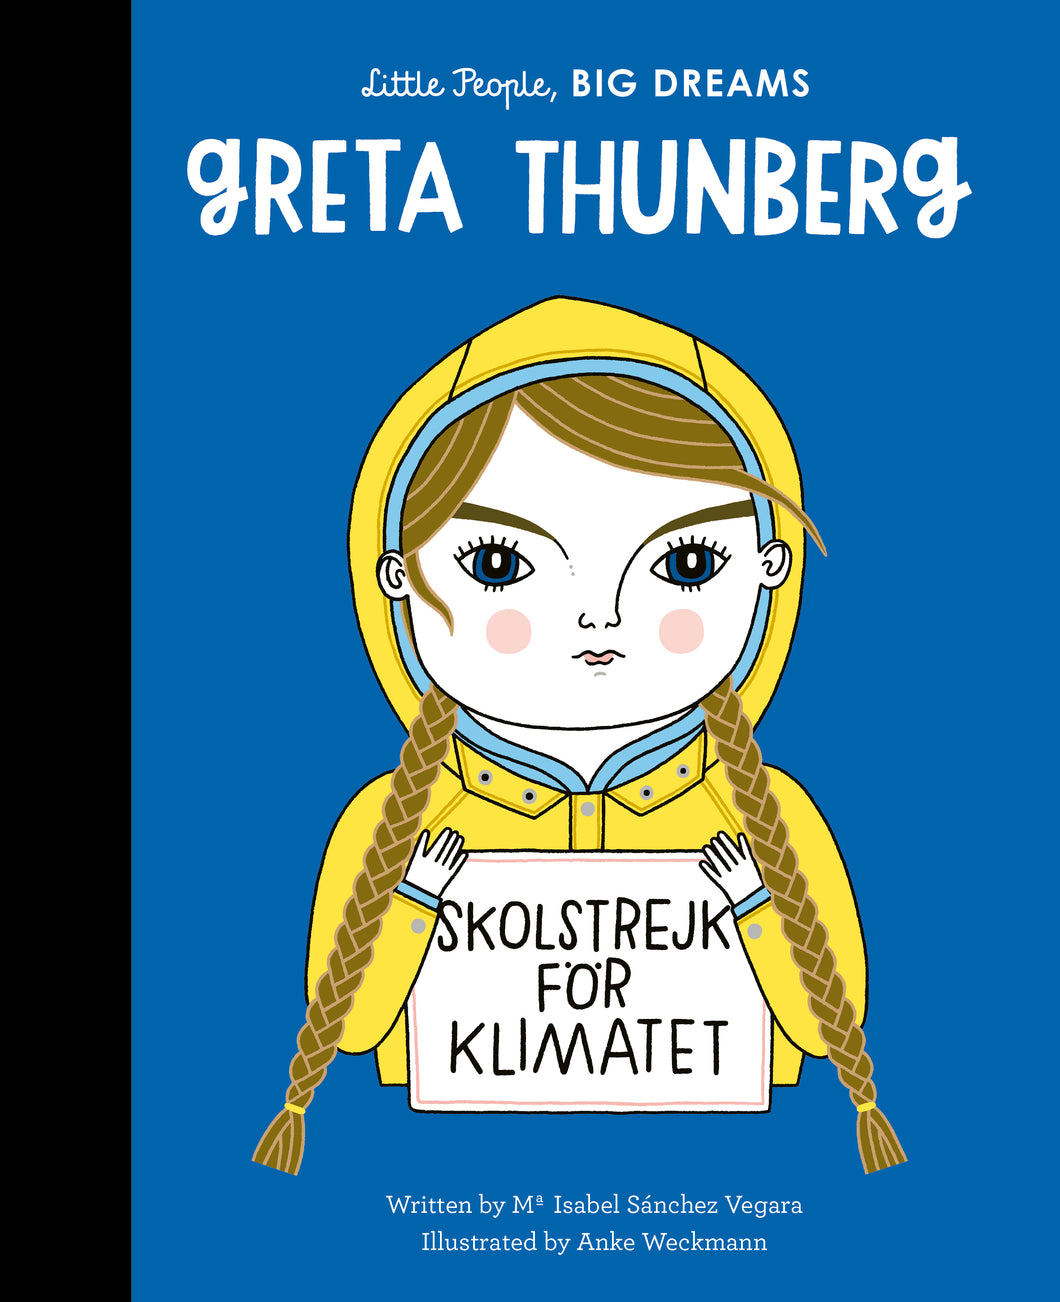 Blue book cover shows illustration of Greta Thunberg (a white woman with 2 blonde plaits) wearing a yellow raincoat and holding a sign that reads 'skolstrejk for klimatet'.